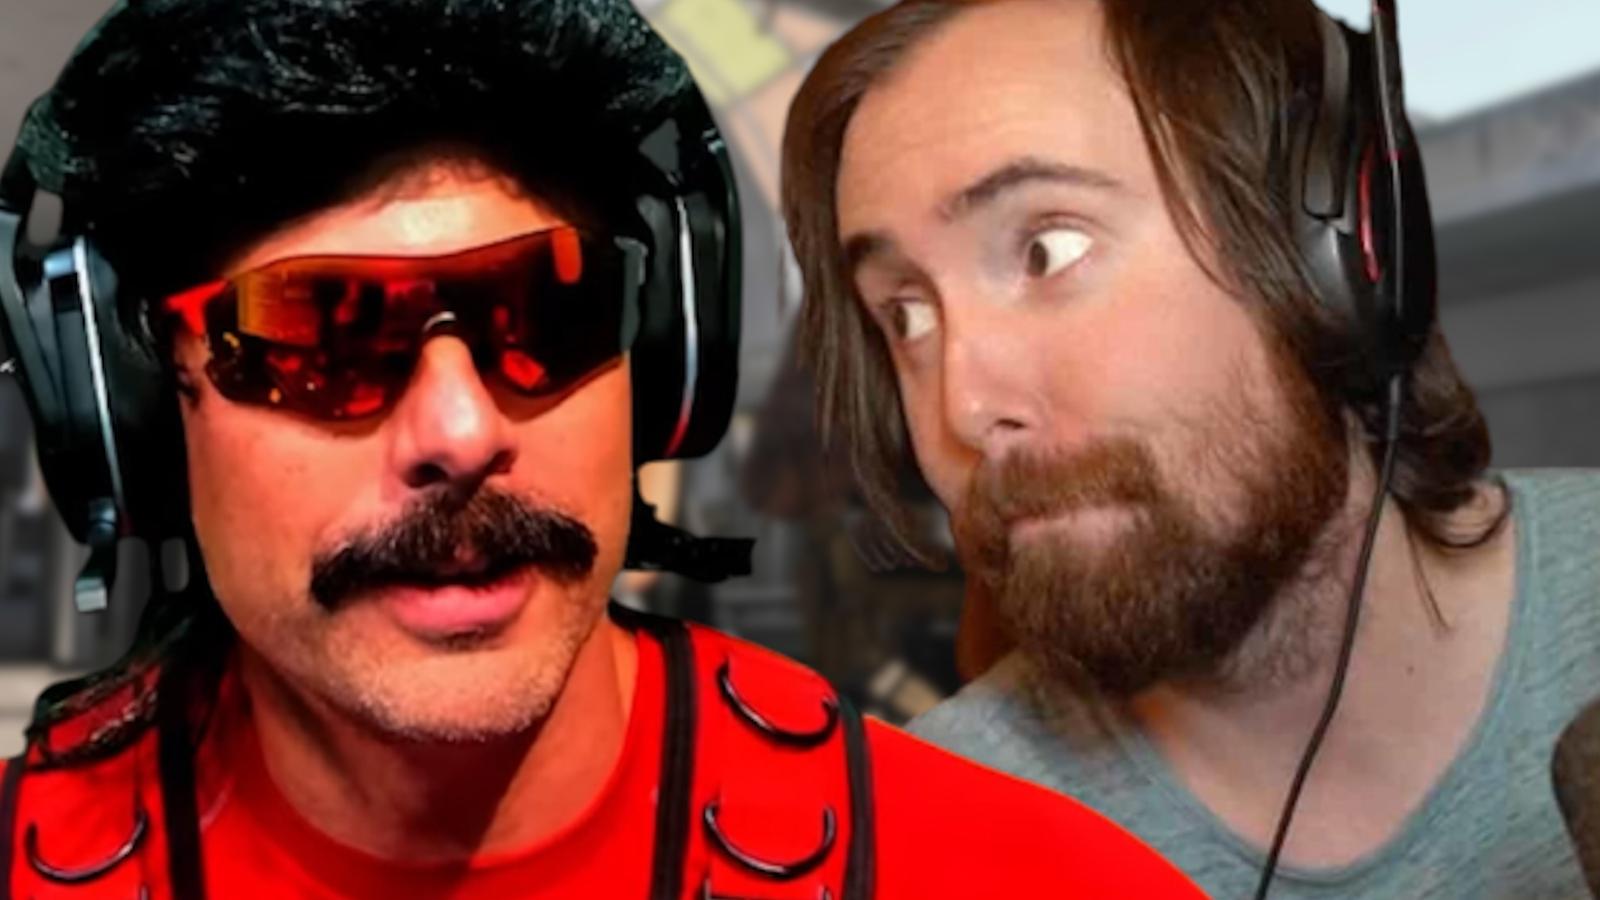 ashley earls recommends dr disrespect girl he cheated with pic